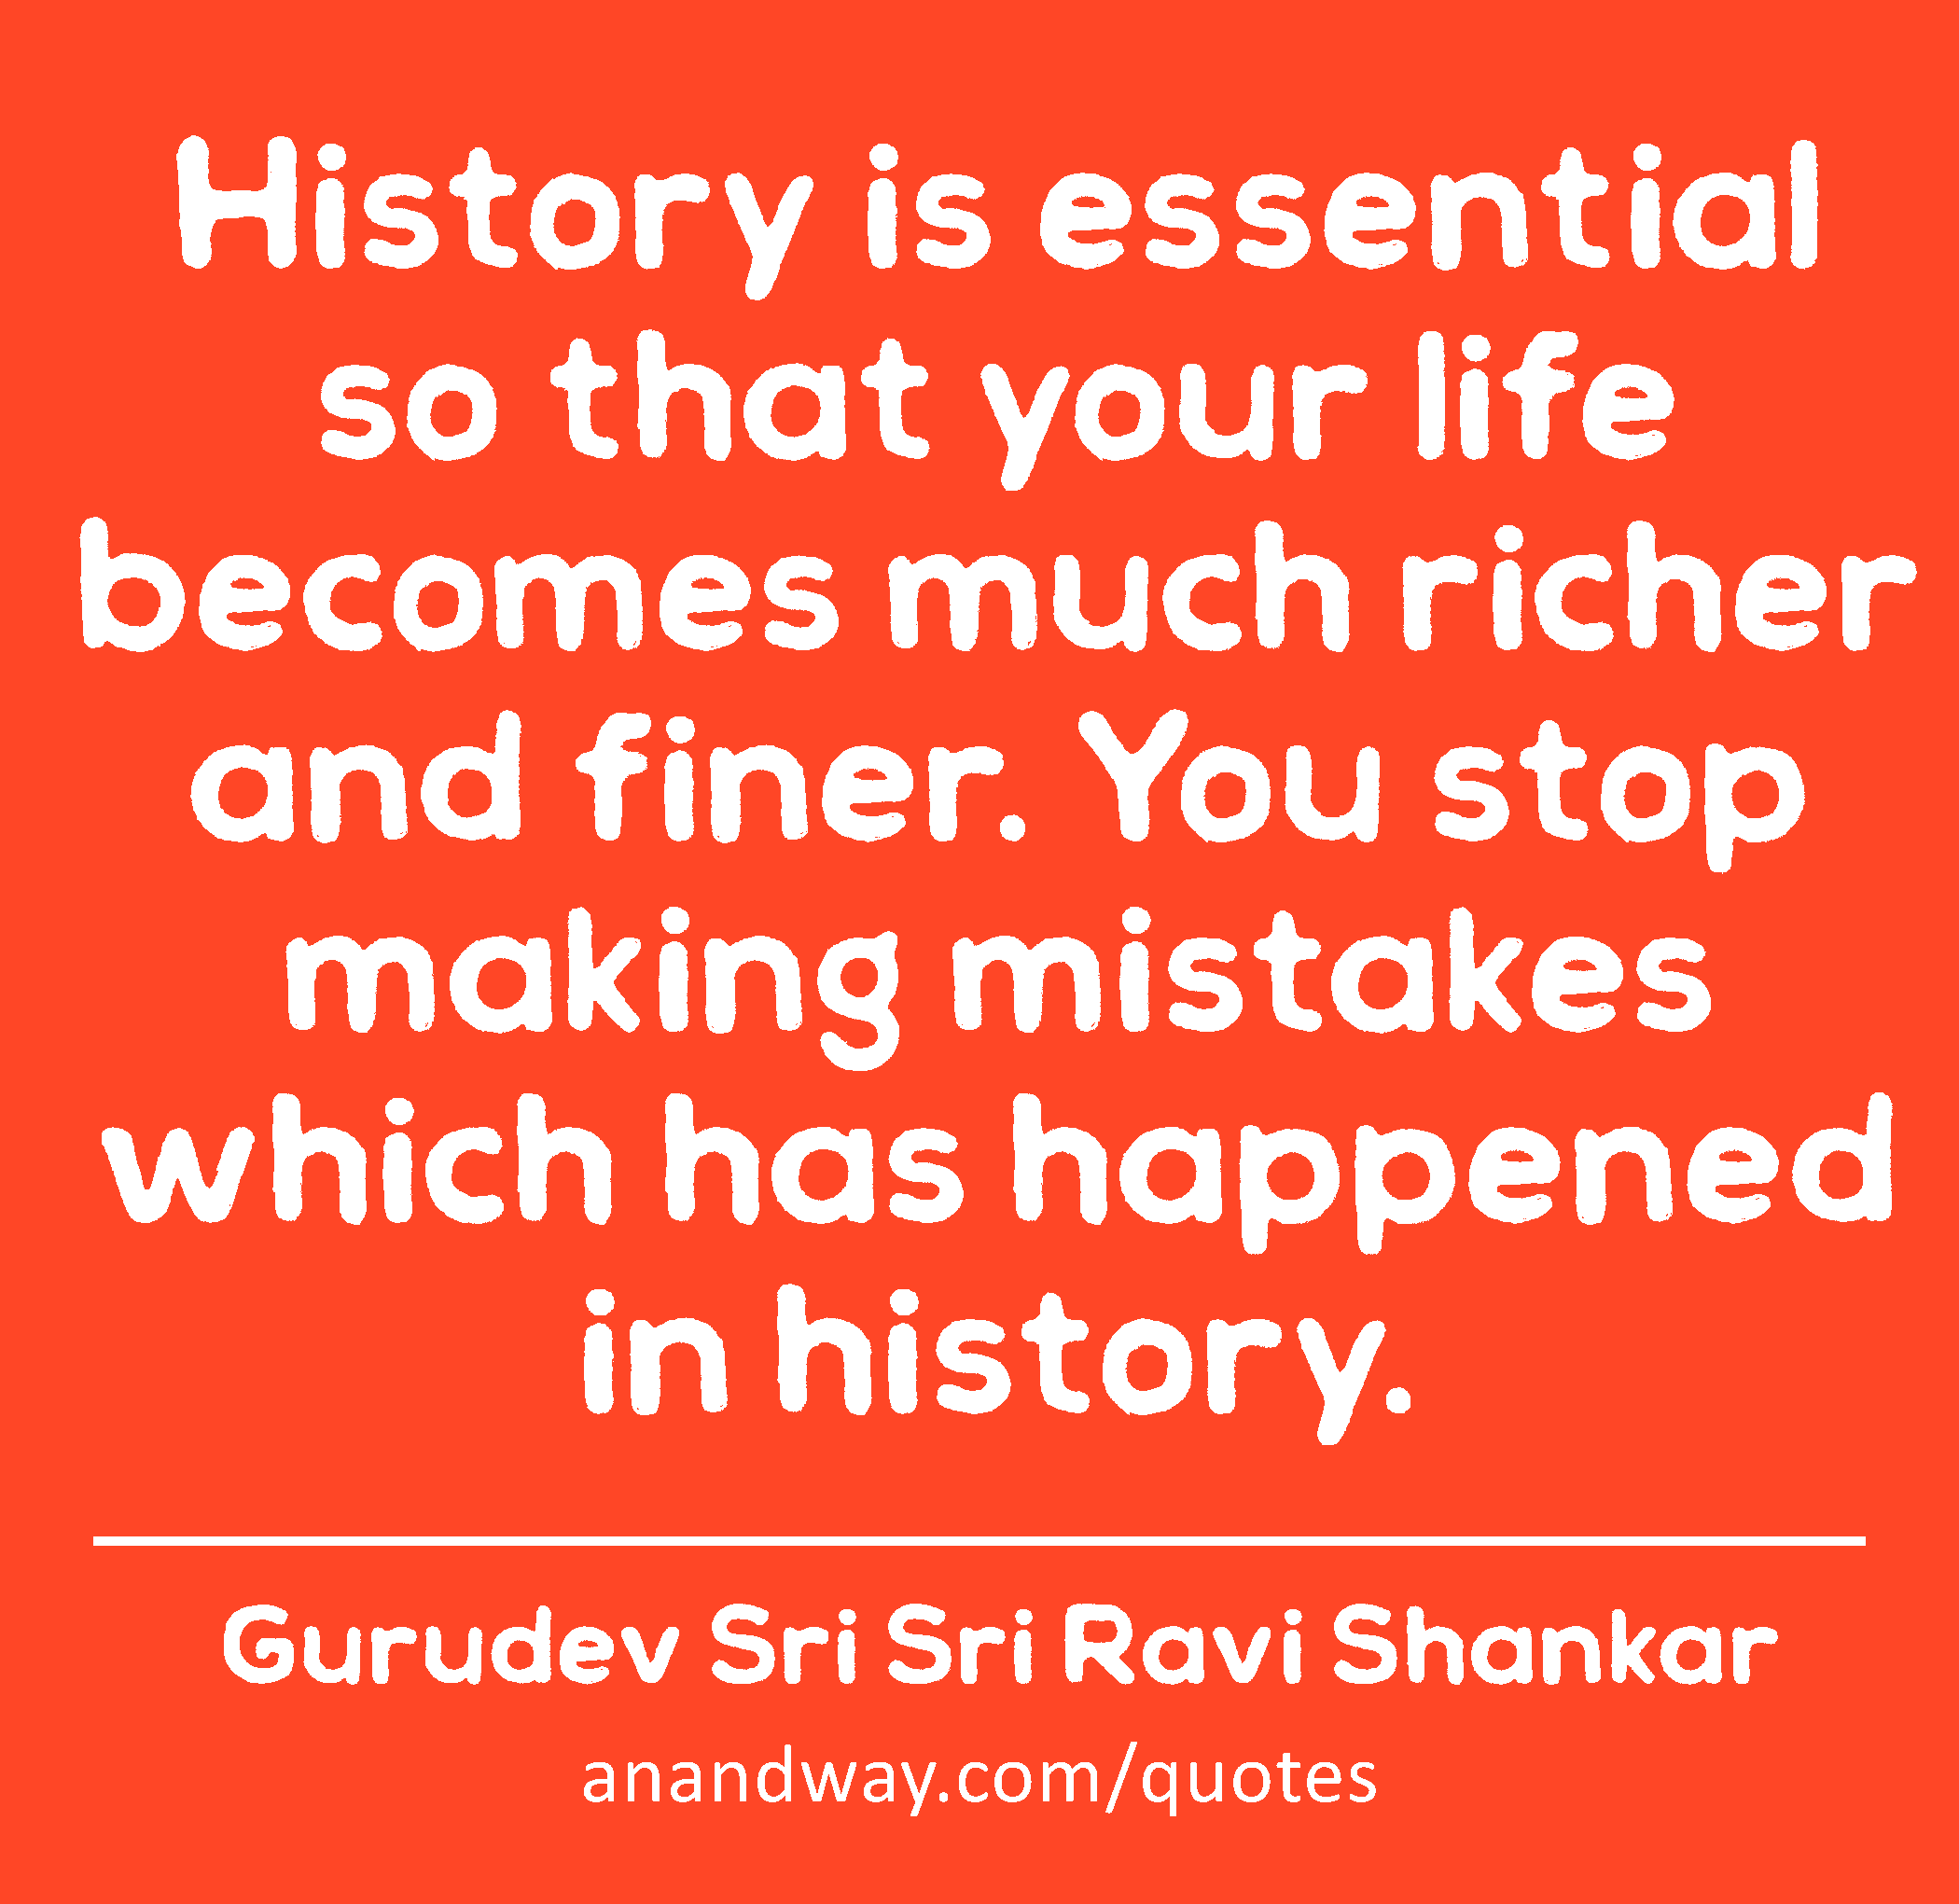 History is essential so that your life becomes much richer and finer. You stop making mistakes
 -Gurudev Sri Sri Ravi Shankar